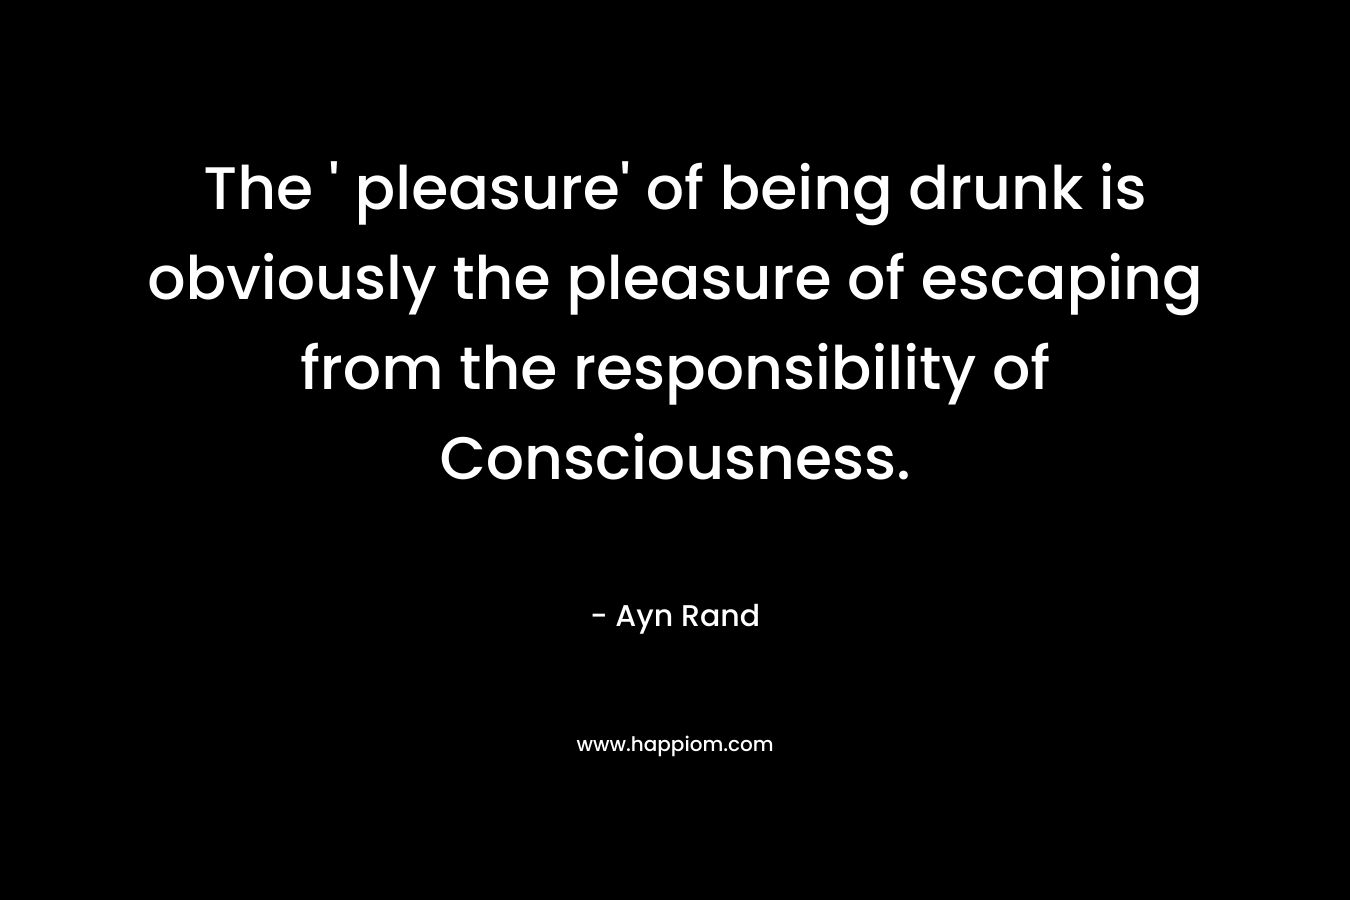 The ‘ pleasure’ of being drunk is obviously the pleasure of escaping from the responsibility of Consciousness. – Ayn Rand